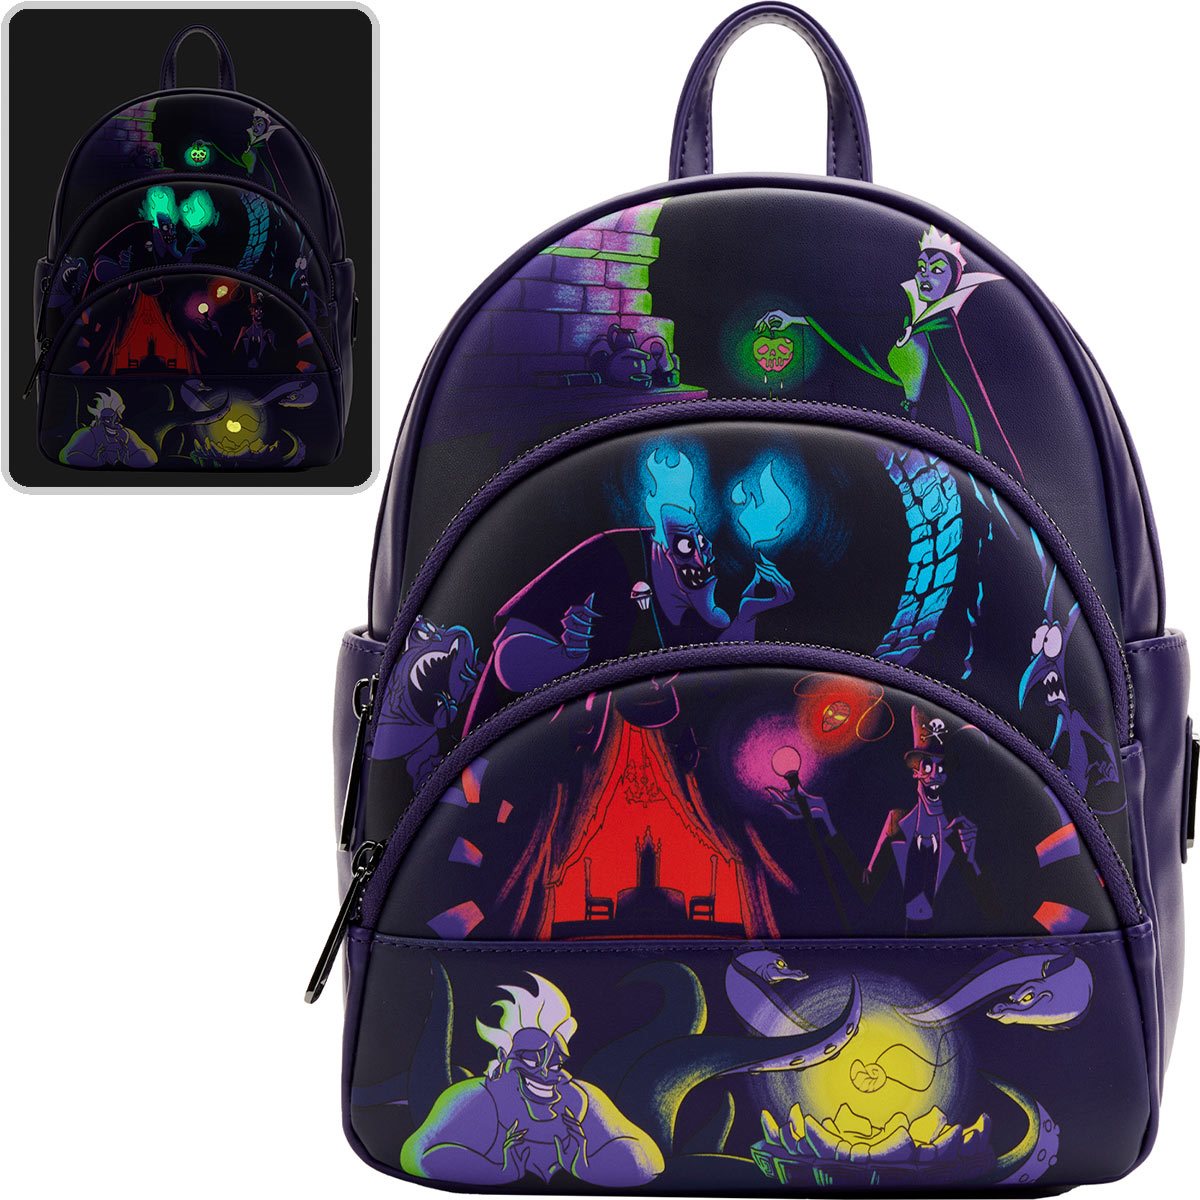 What is the most expensive loungefly backpack - Loungefly Disney Villains Backpack